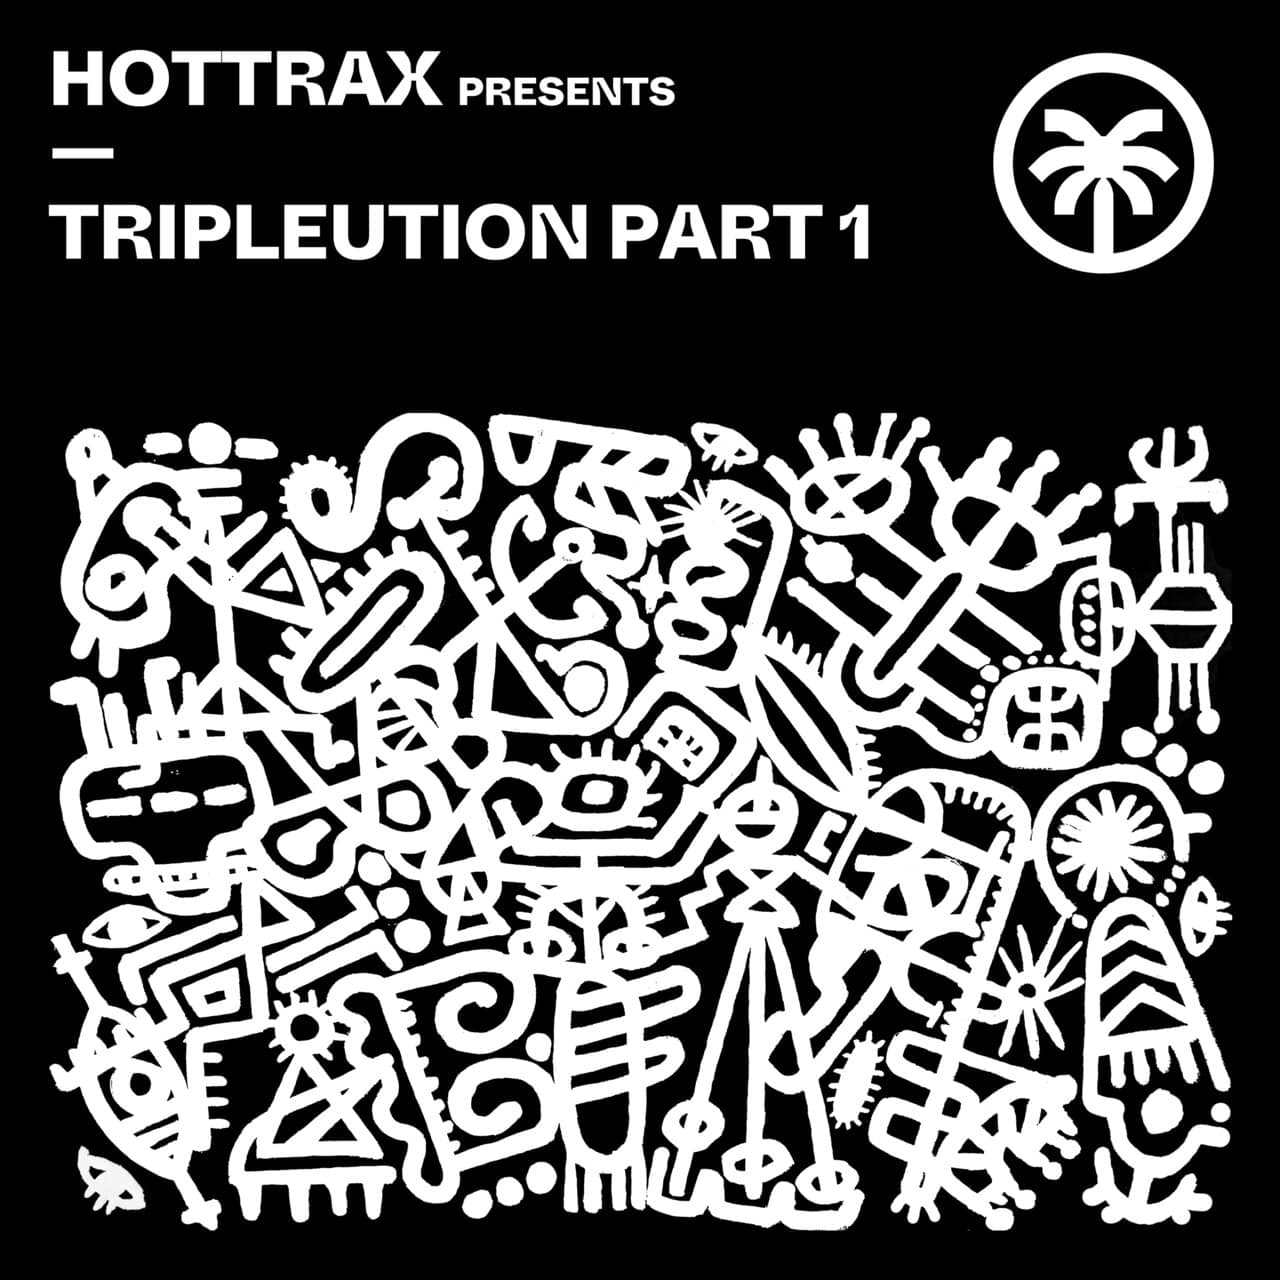 image cover: Qubiko - Hottrax presents Tripleution Part 1 by Hottrax